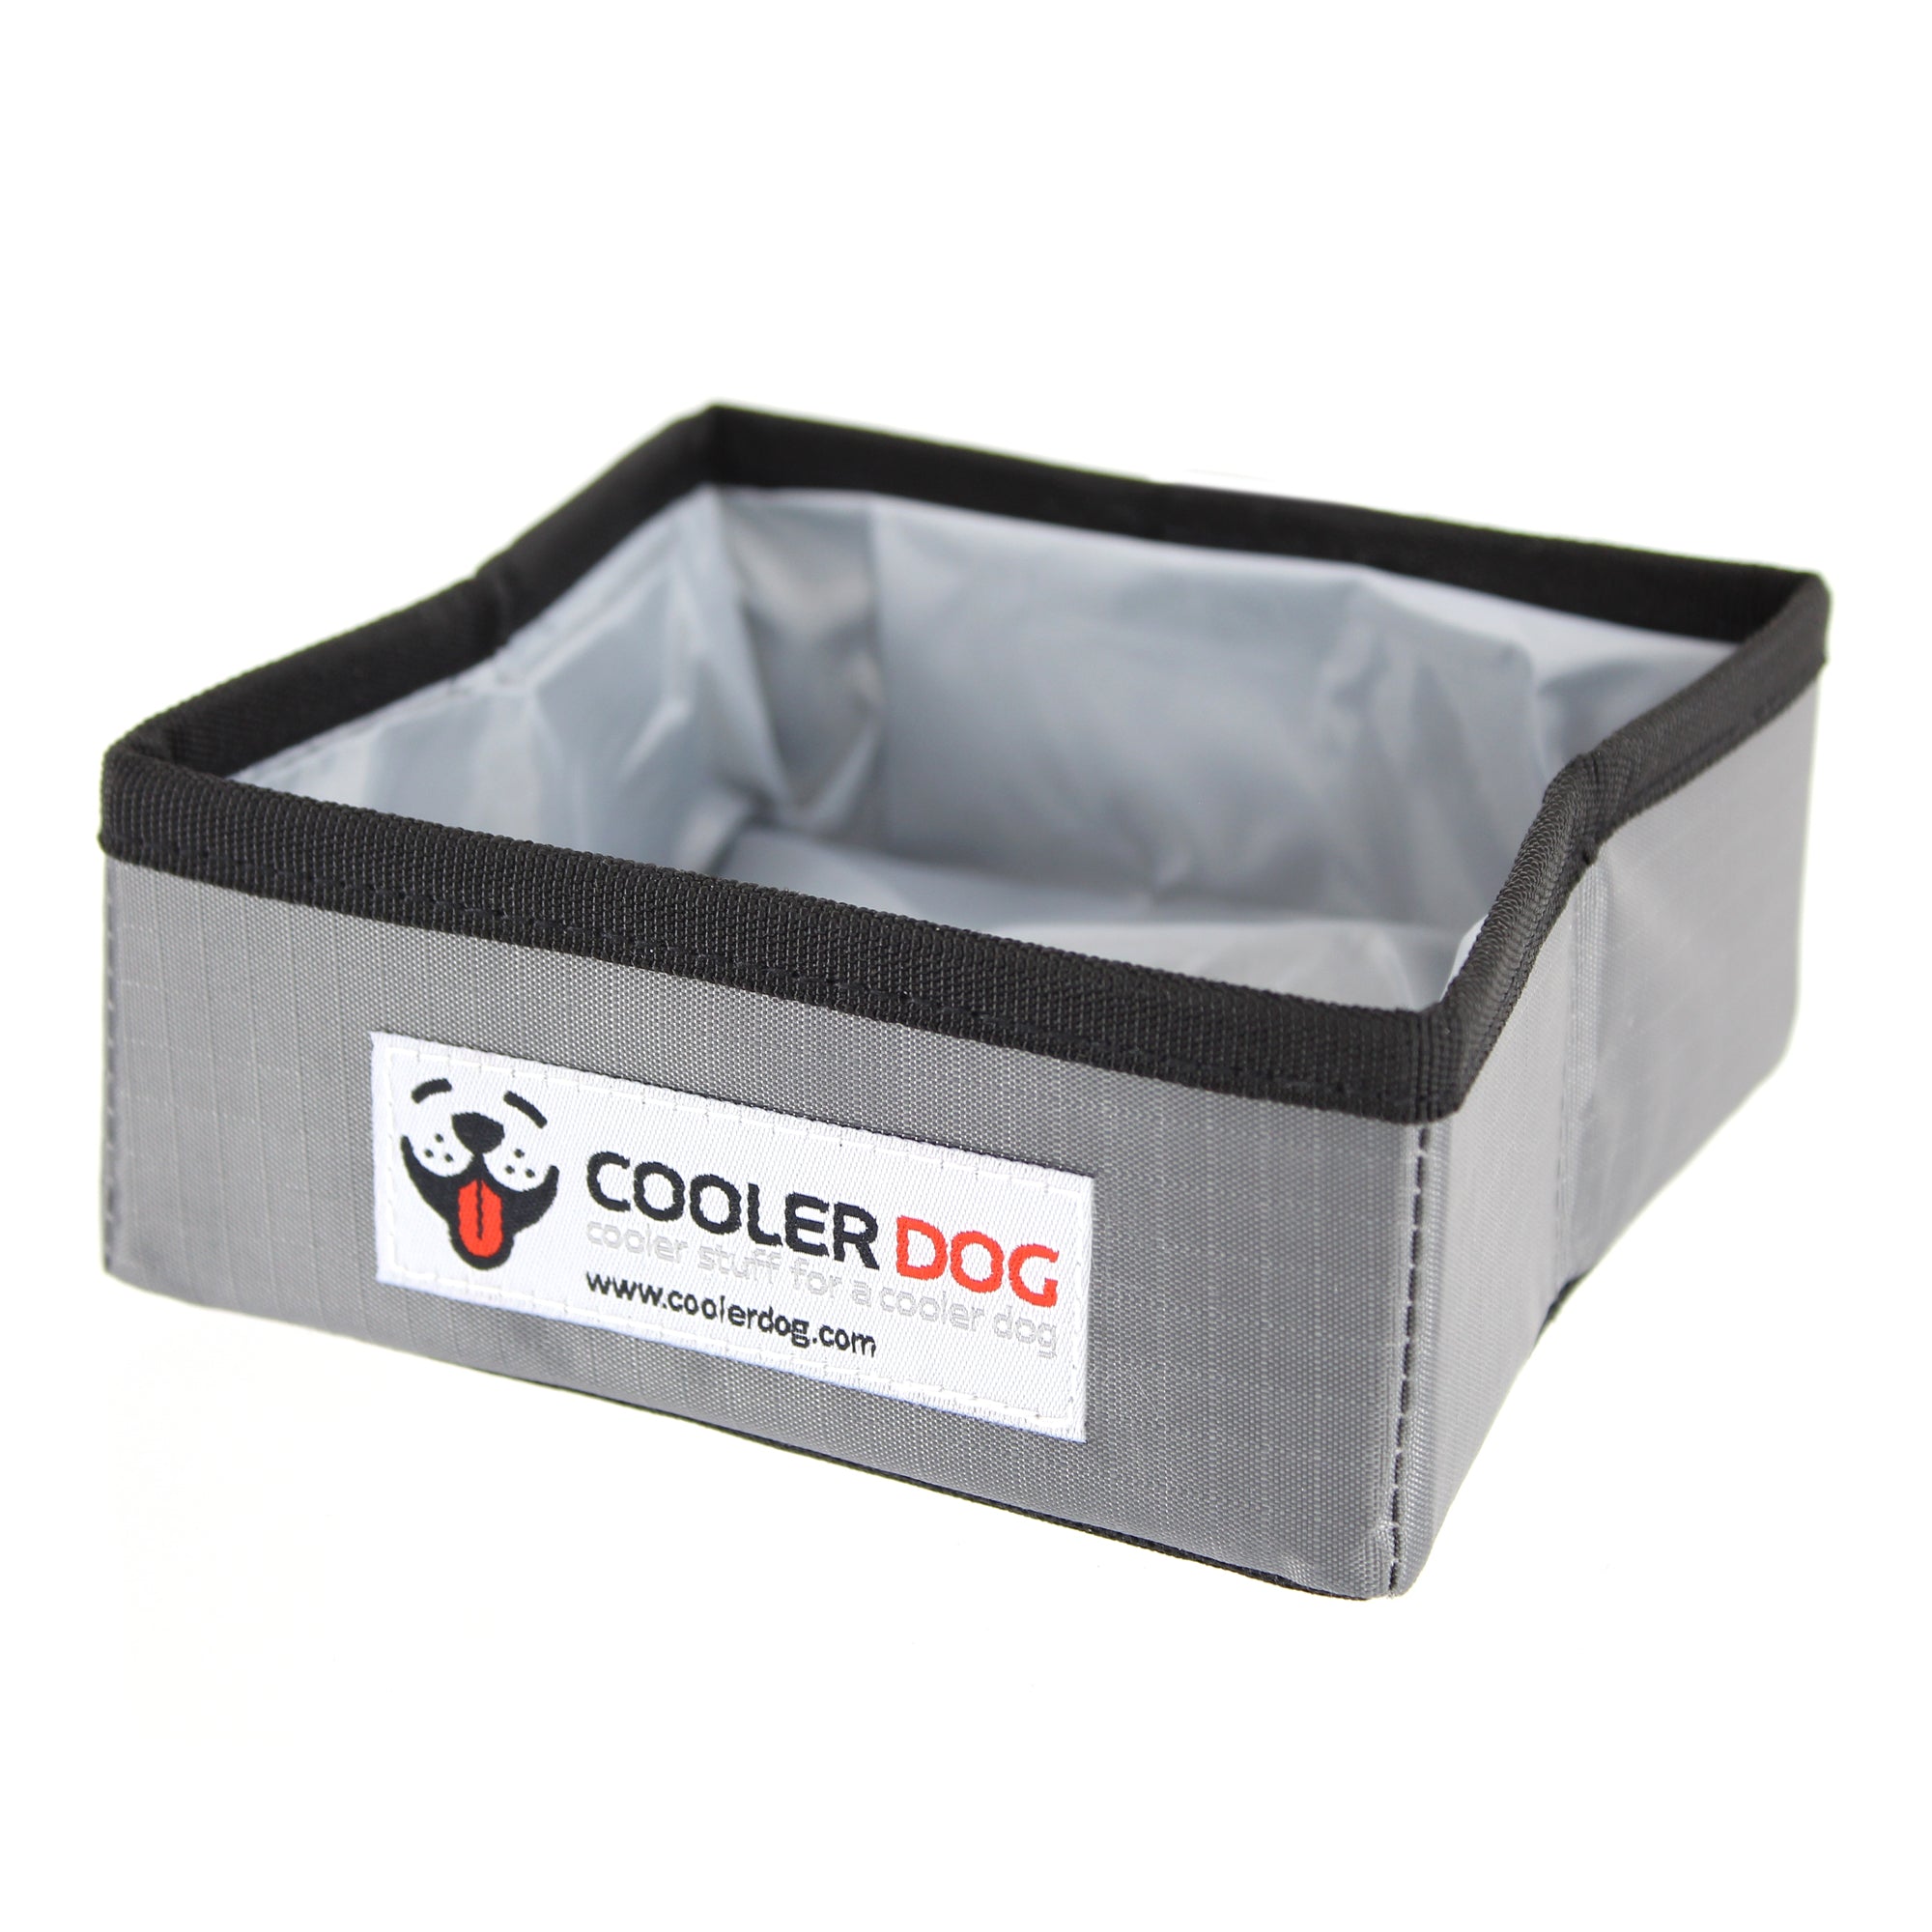 Unfolded CoolerDog small portable dog bowl, without water